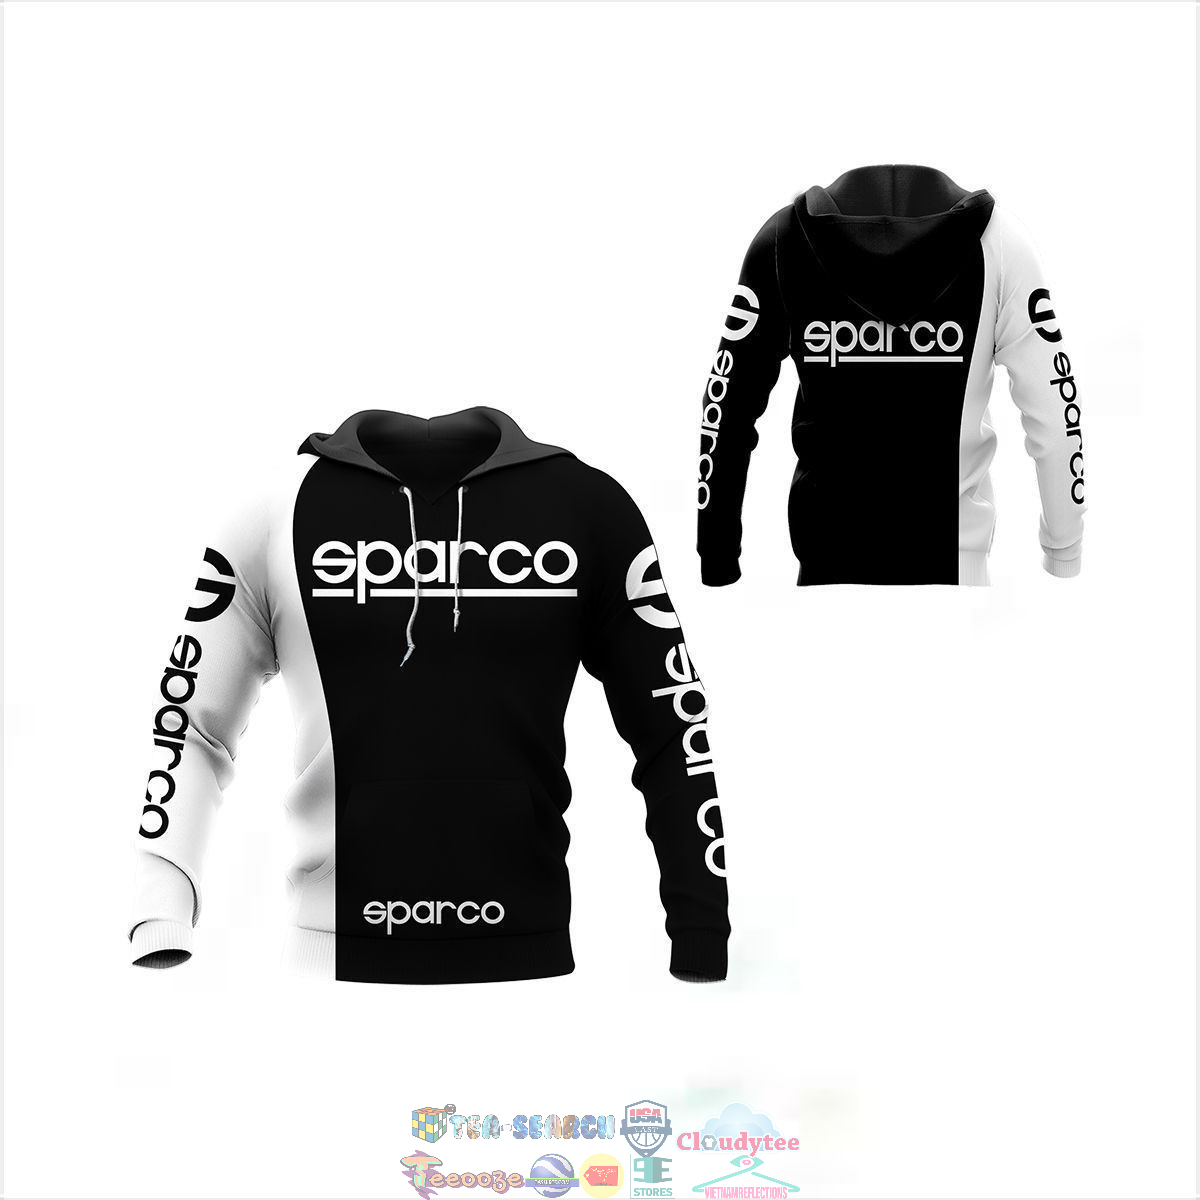 Sparco ver 23 3D hoodie and t-shirt